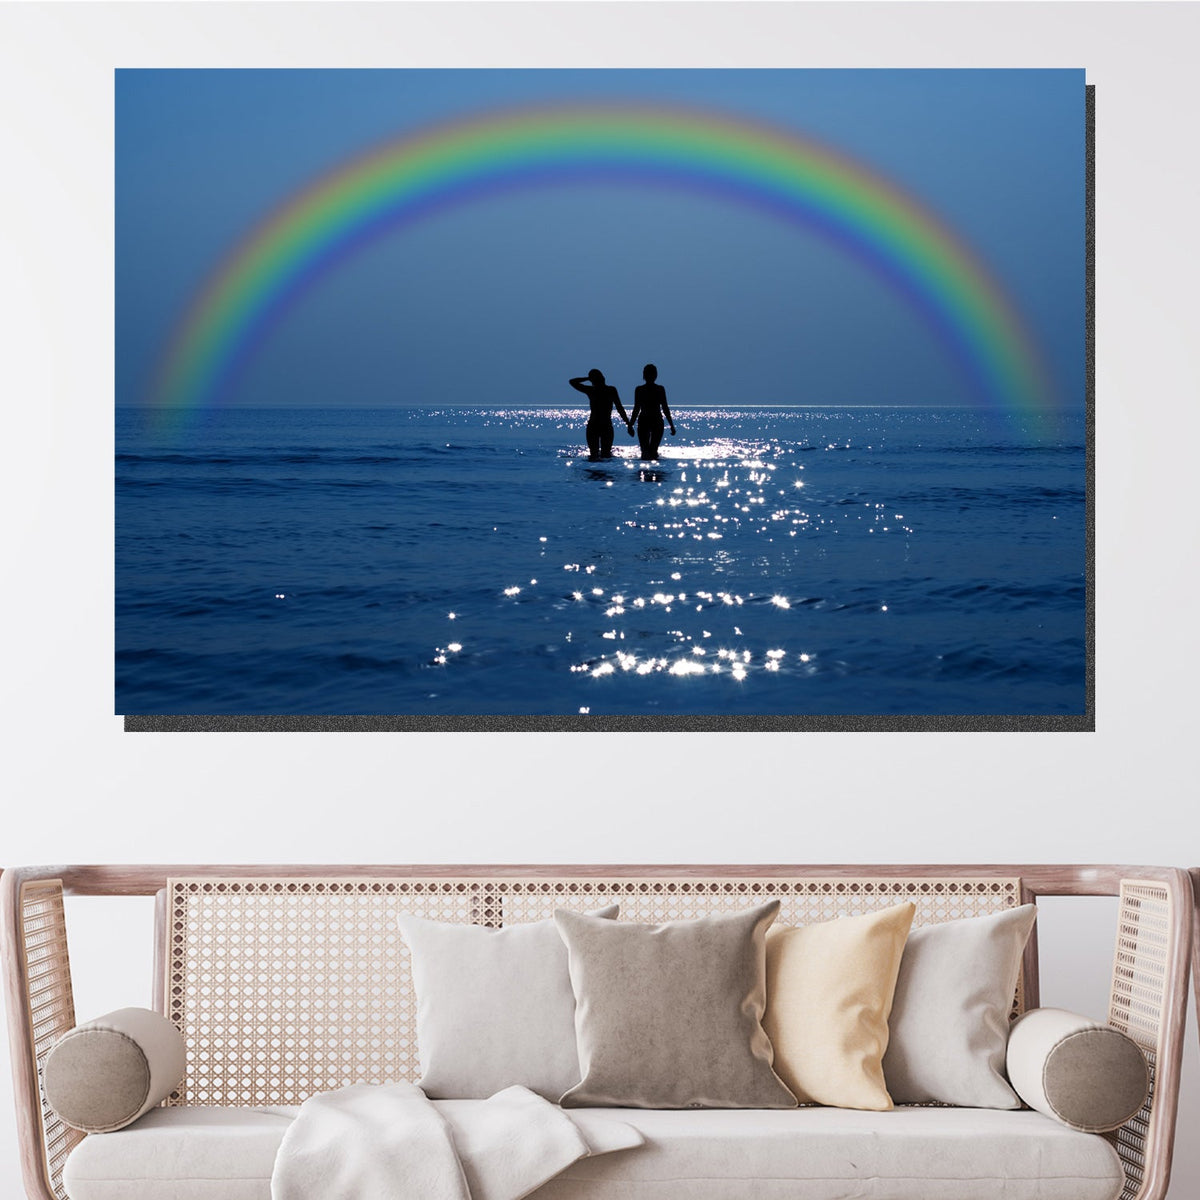 https://cdn.shopify.com/s/files/1/0387/9986/8044/products/LoveIsaRainbowCanvasArtprintStretched-1.jpg